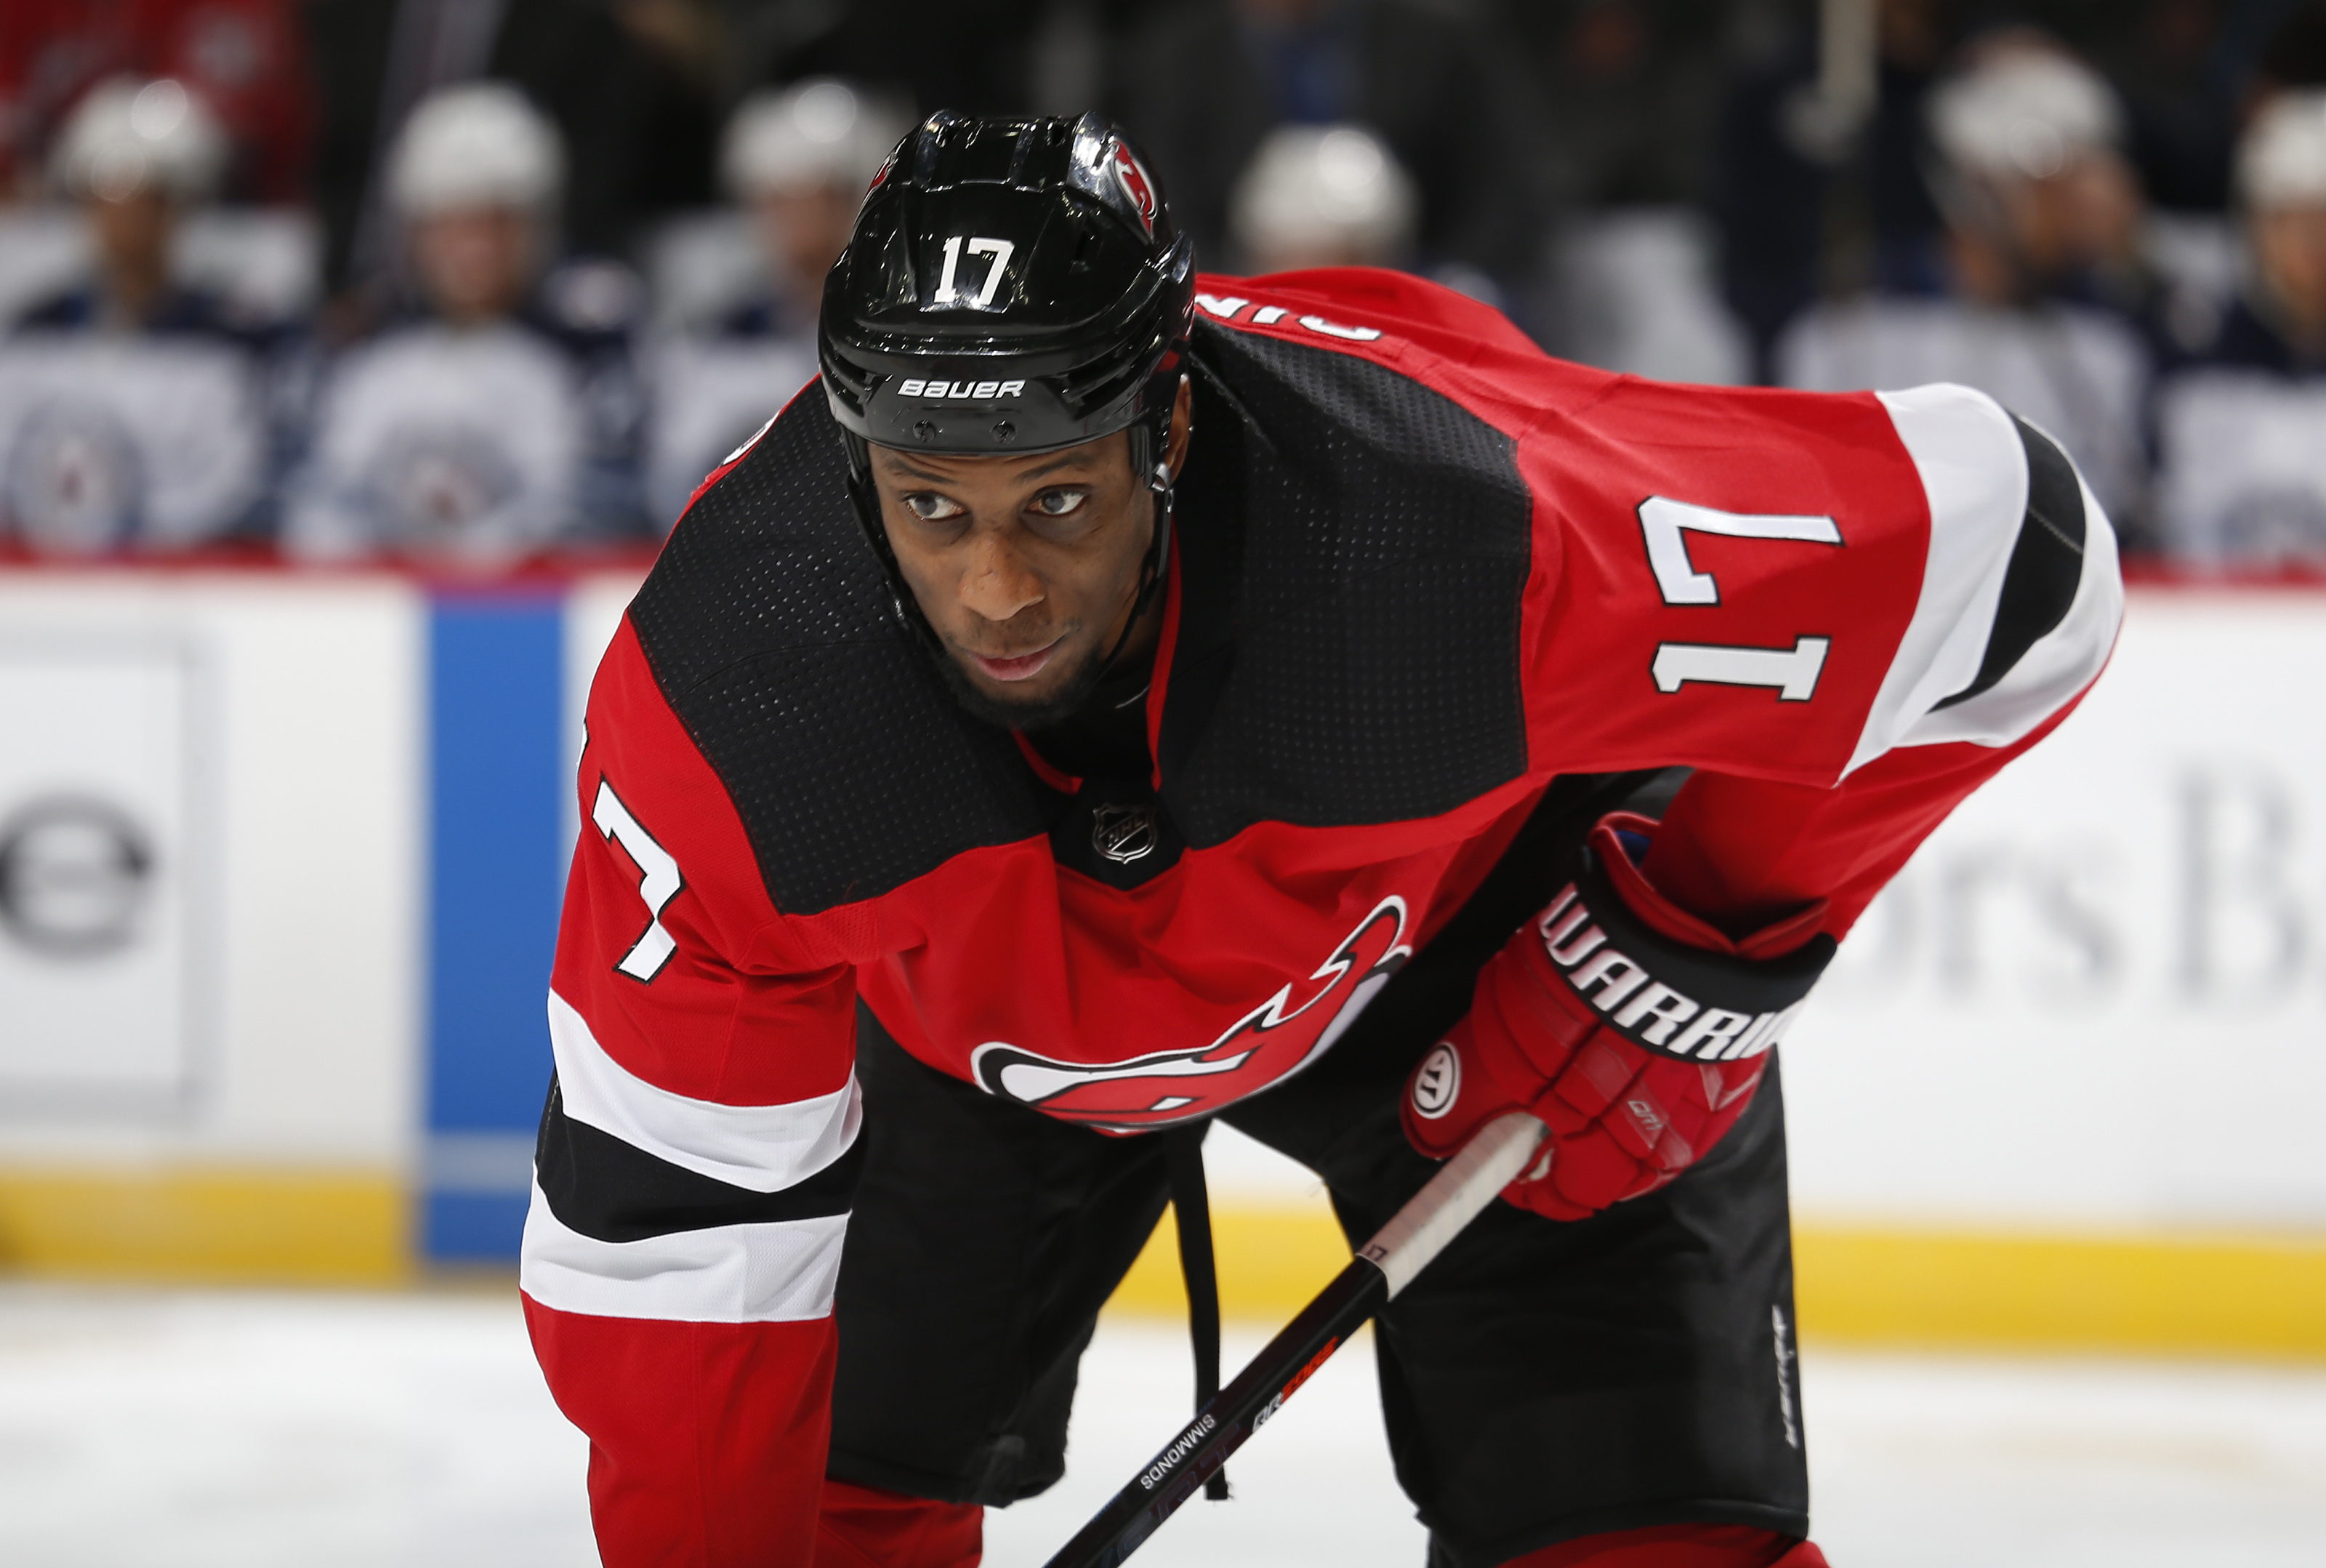 Wayne Simmonds sparks late barrage to push Devils by Red Wings